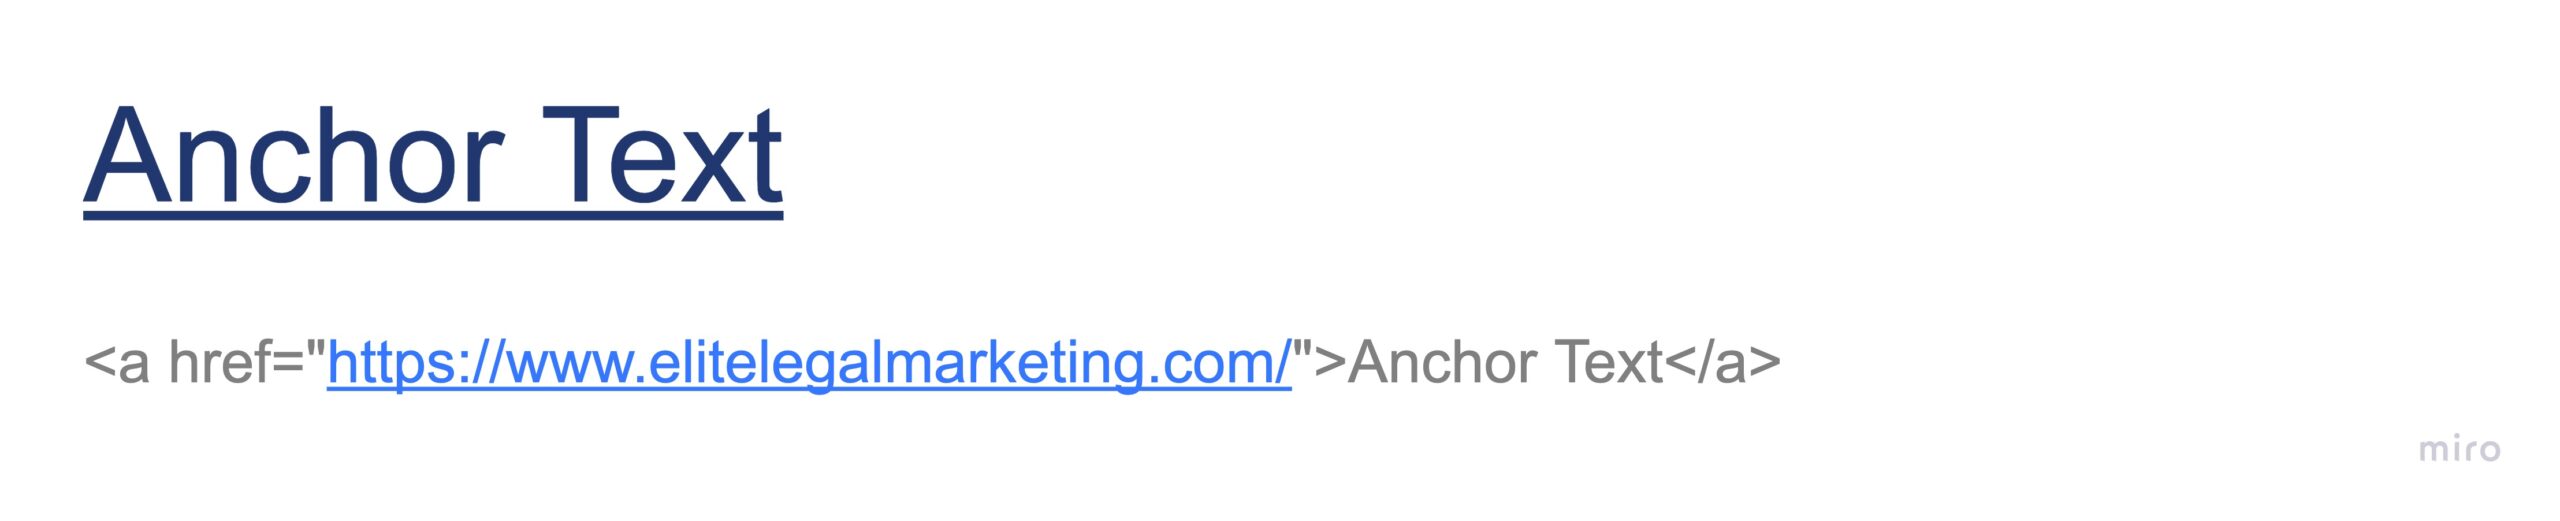 structure of an anchor text